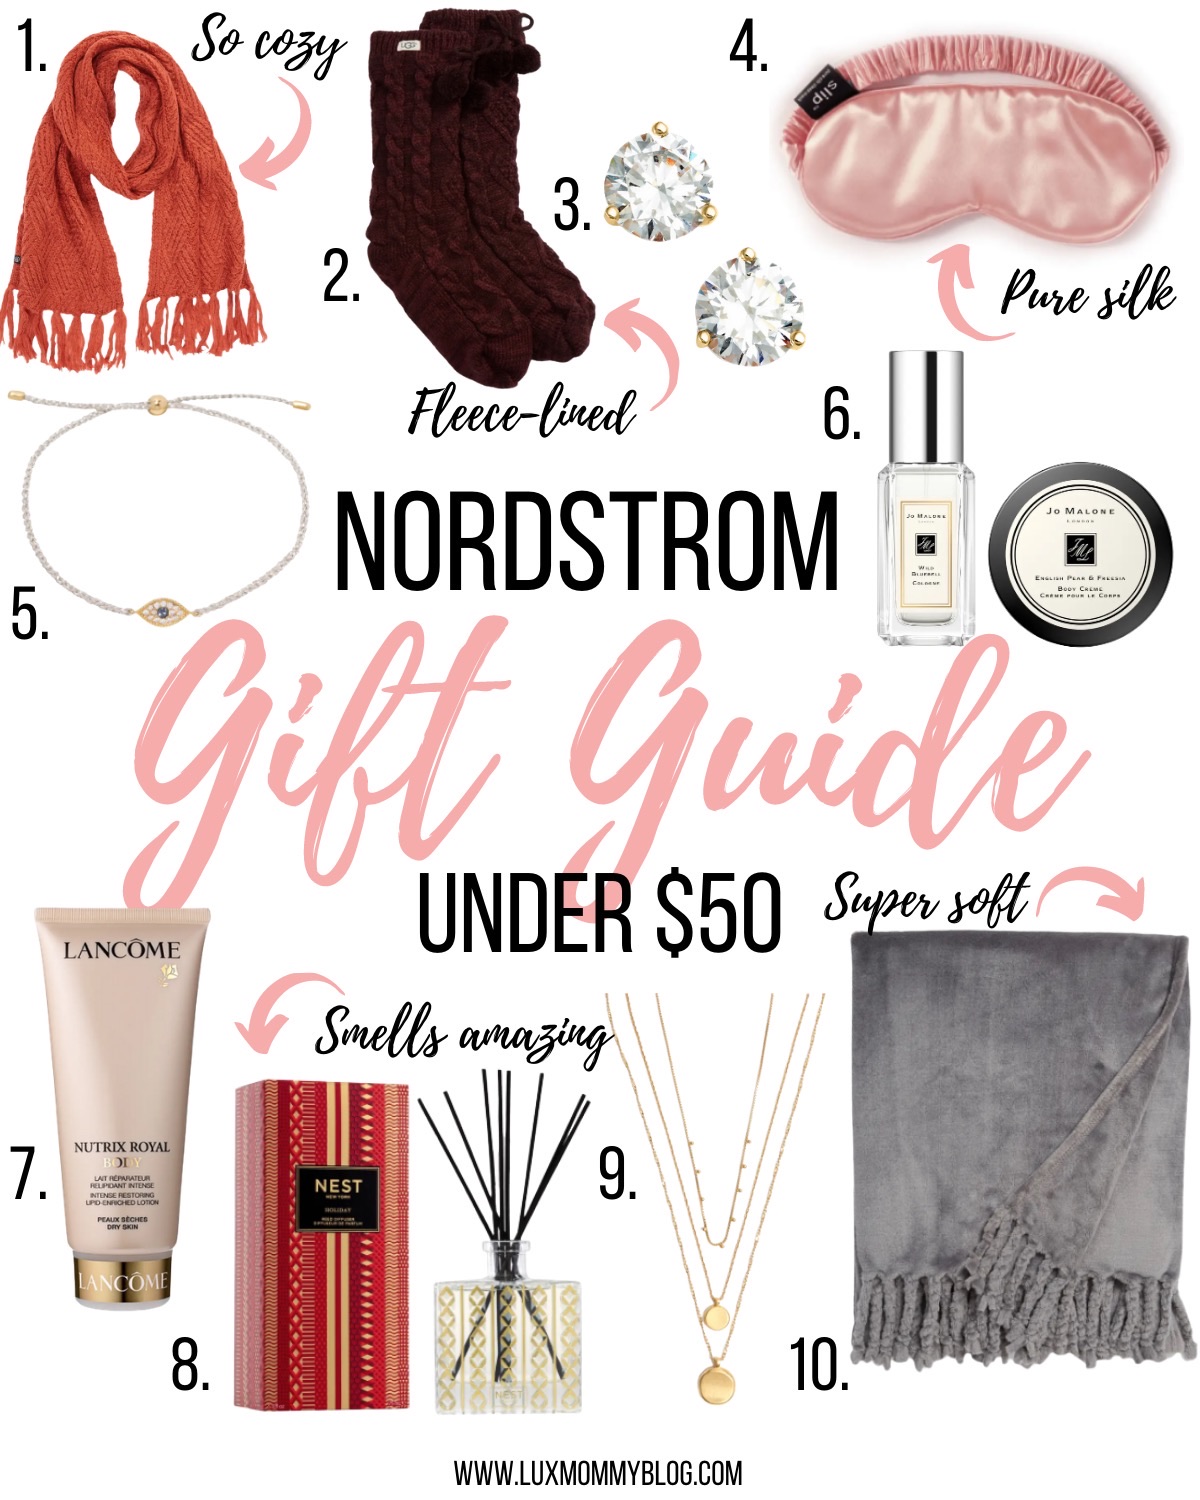 Last Minute Gift Ideas for Her, Him and Kids, LuxMommy